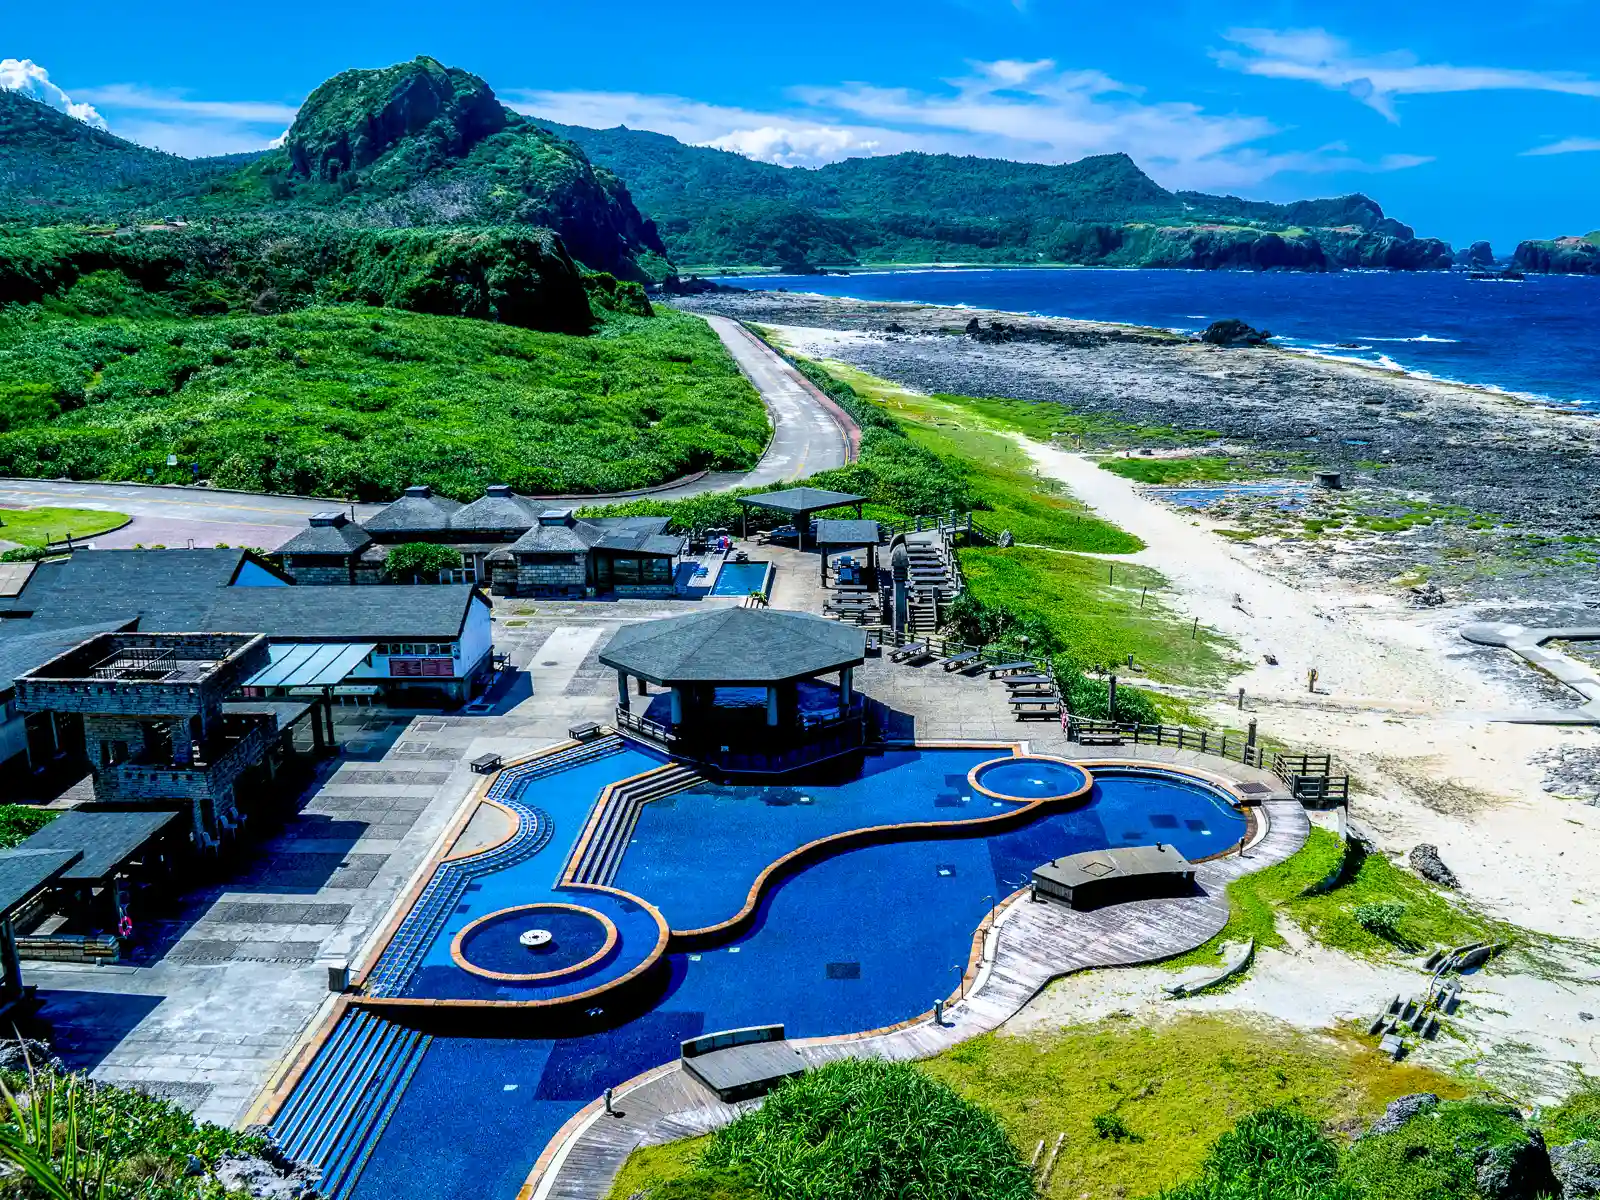 The Zhaori Hot Spring complex features a multitiered pool just steps away from the beach and shoreline.